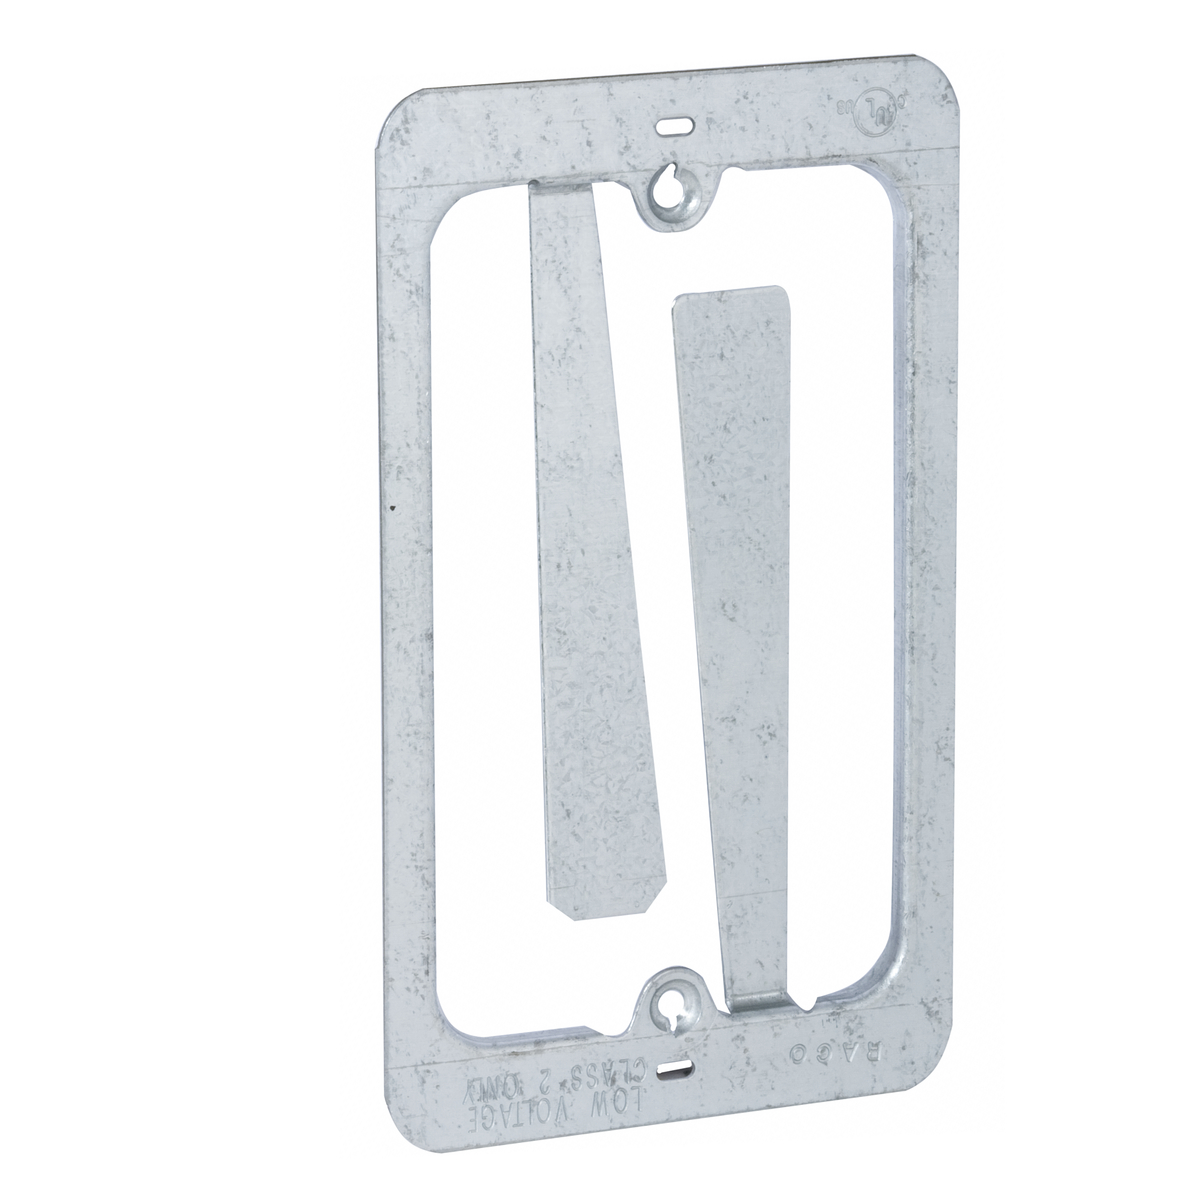 LOW VOLTAGE MOUNTING BRACKET - BARCODED